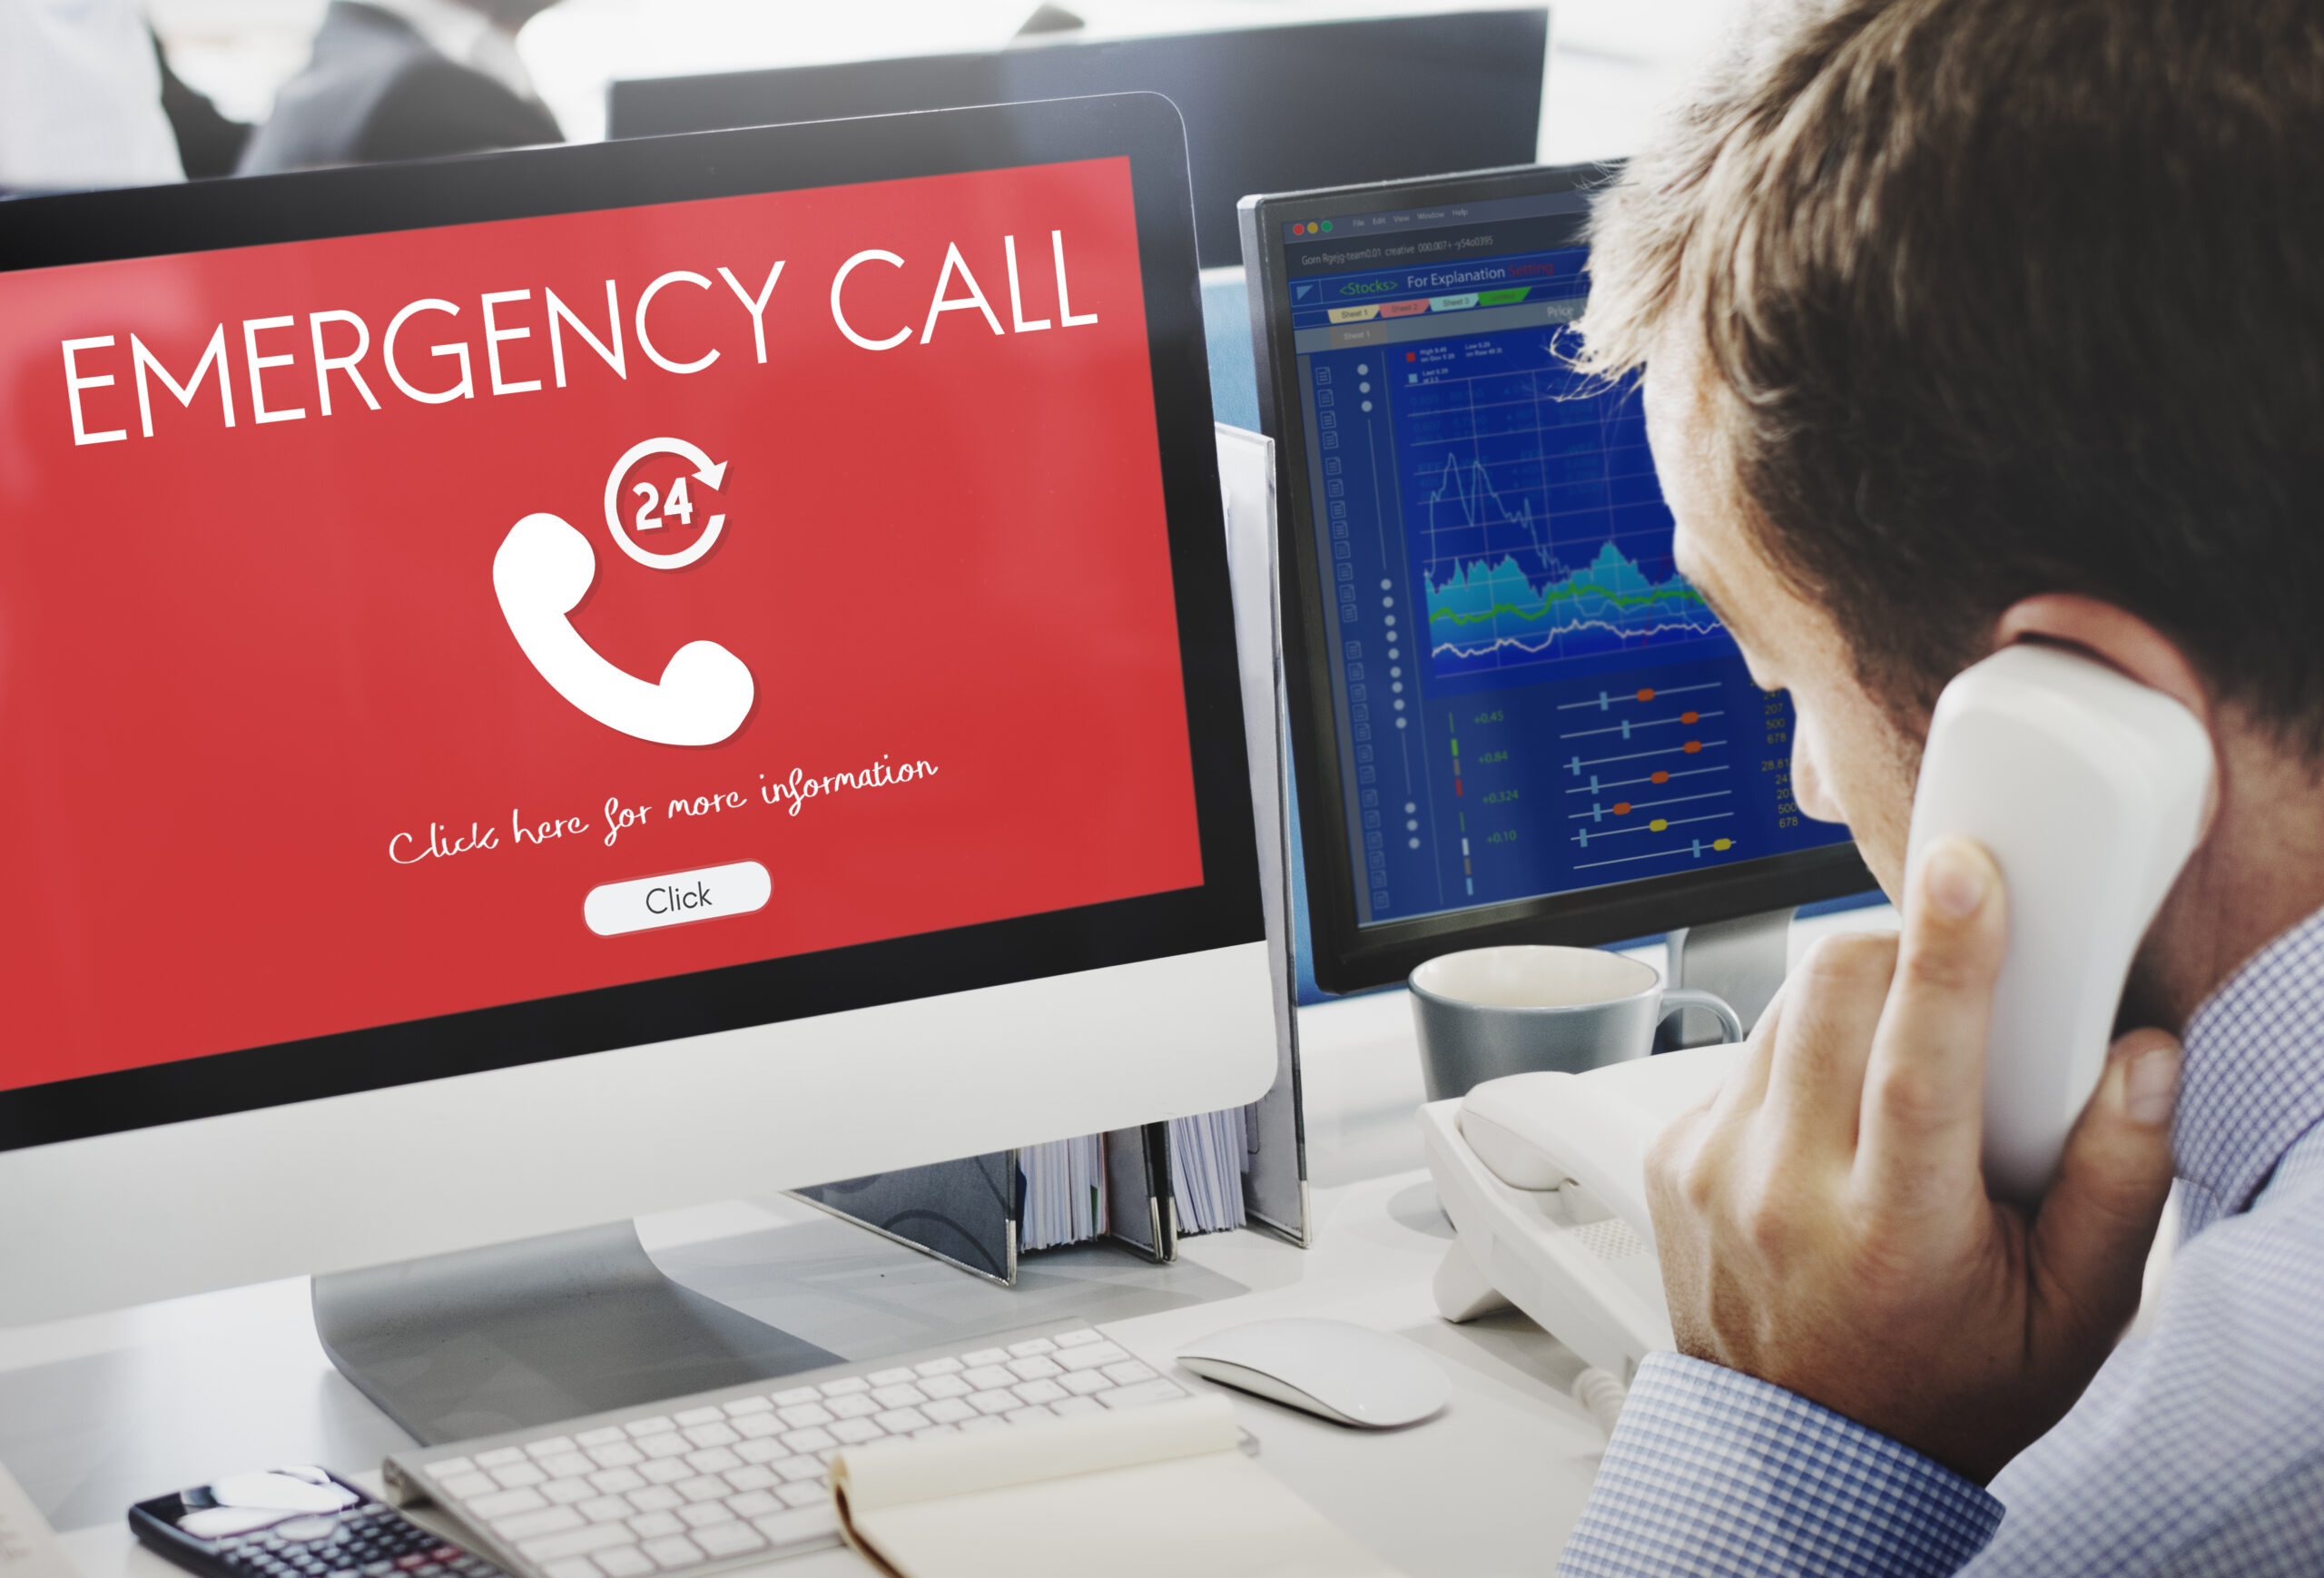 Supporting service com. Emergency services. Calling the Emergency services. Emergency Call картинки. Emergency support.